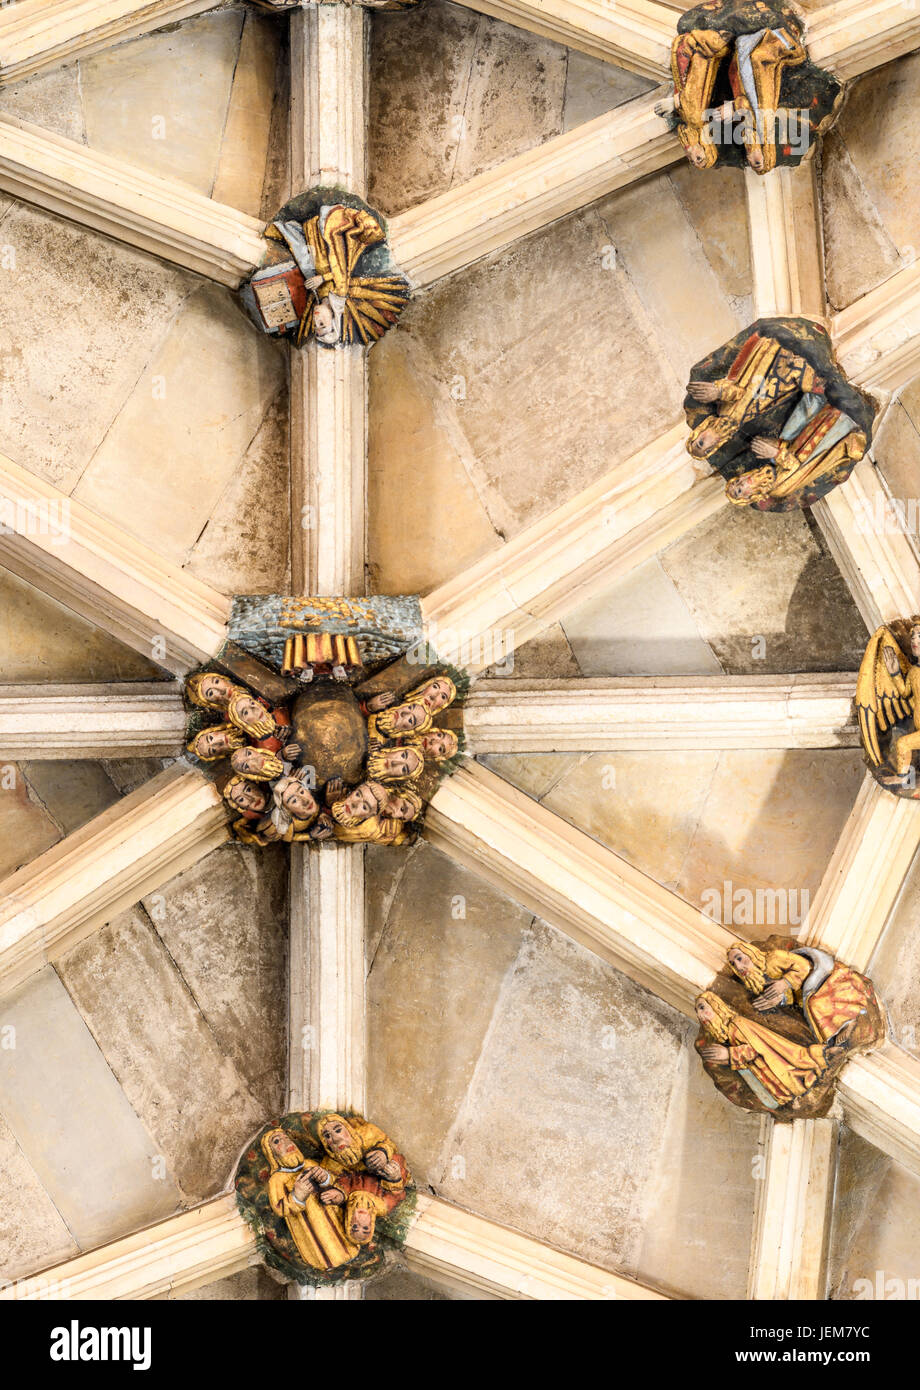 Painted stone boss on the ceiling of the nave of Norwich cathedral depicting the disciples of Jesus witness his ascension into heaven. Stock Photo